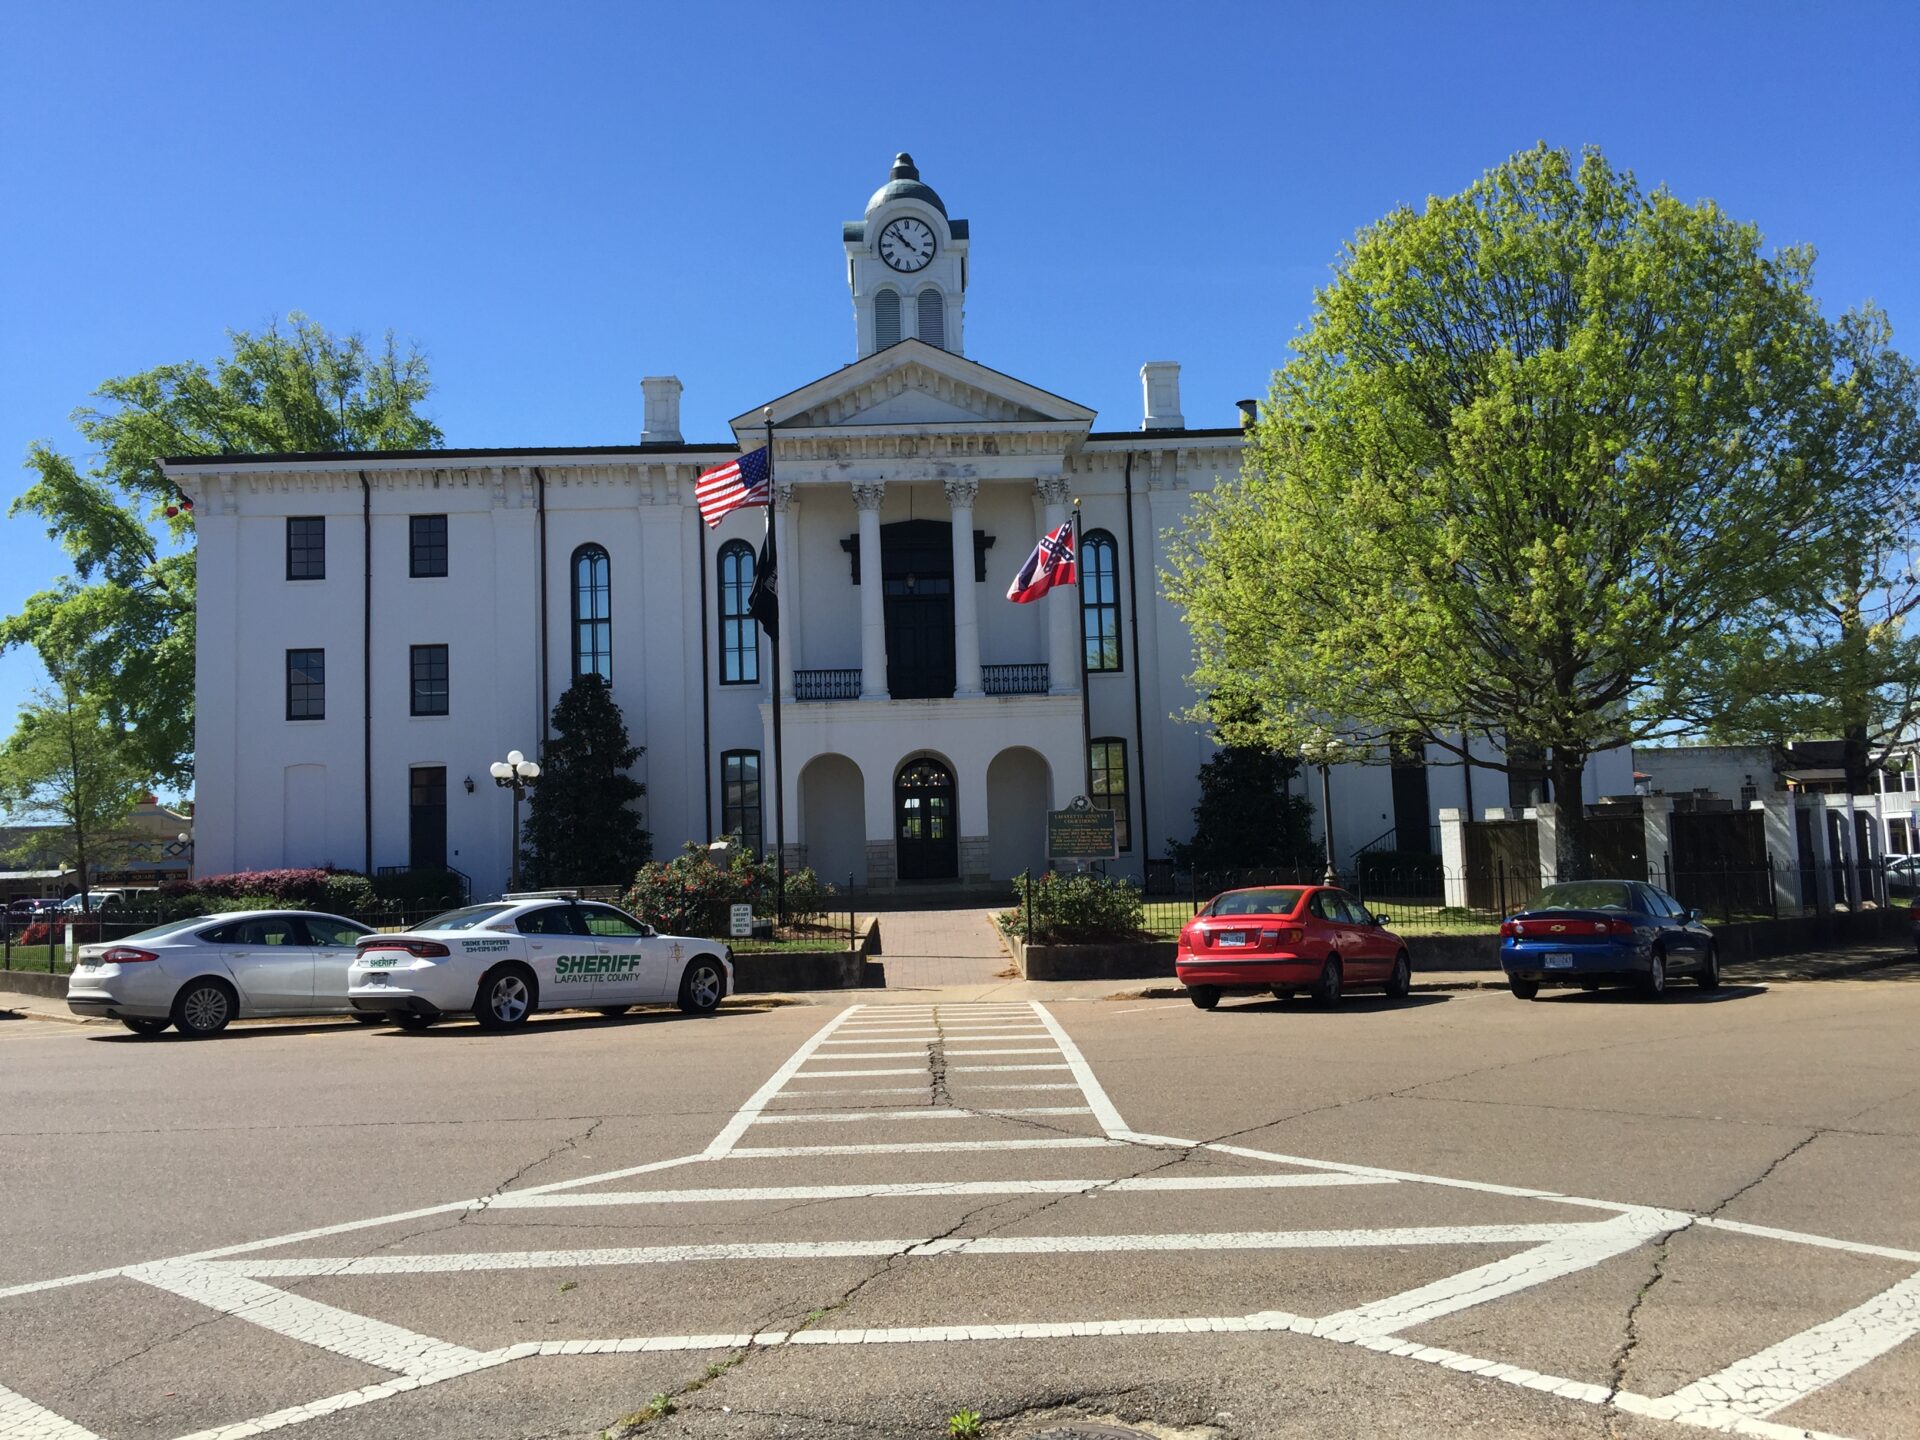 The trial for murder of Zacharias McClendon took place at Lafayette Courthouse.